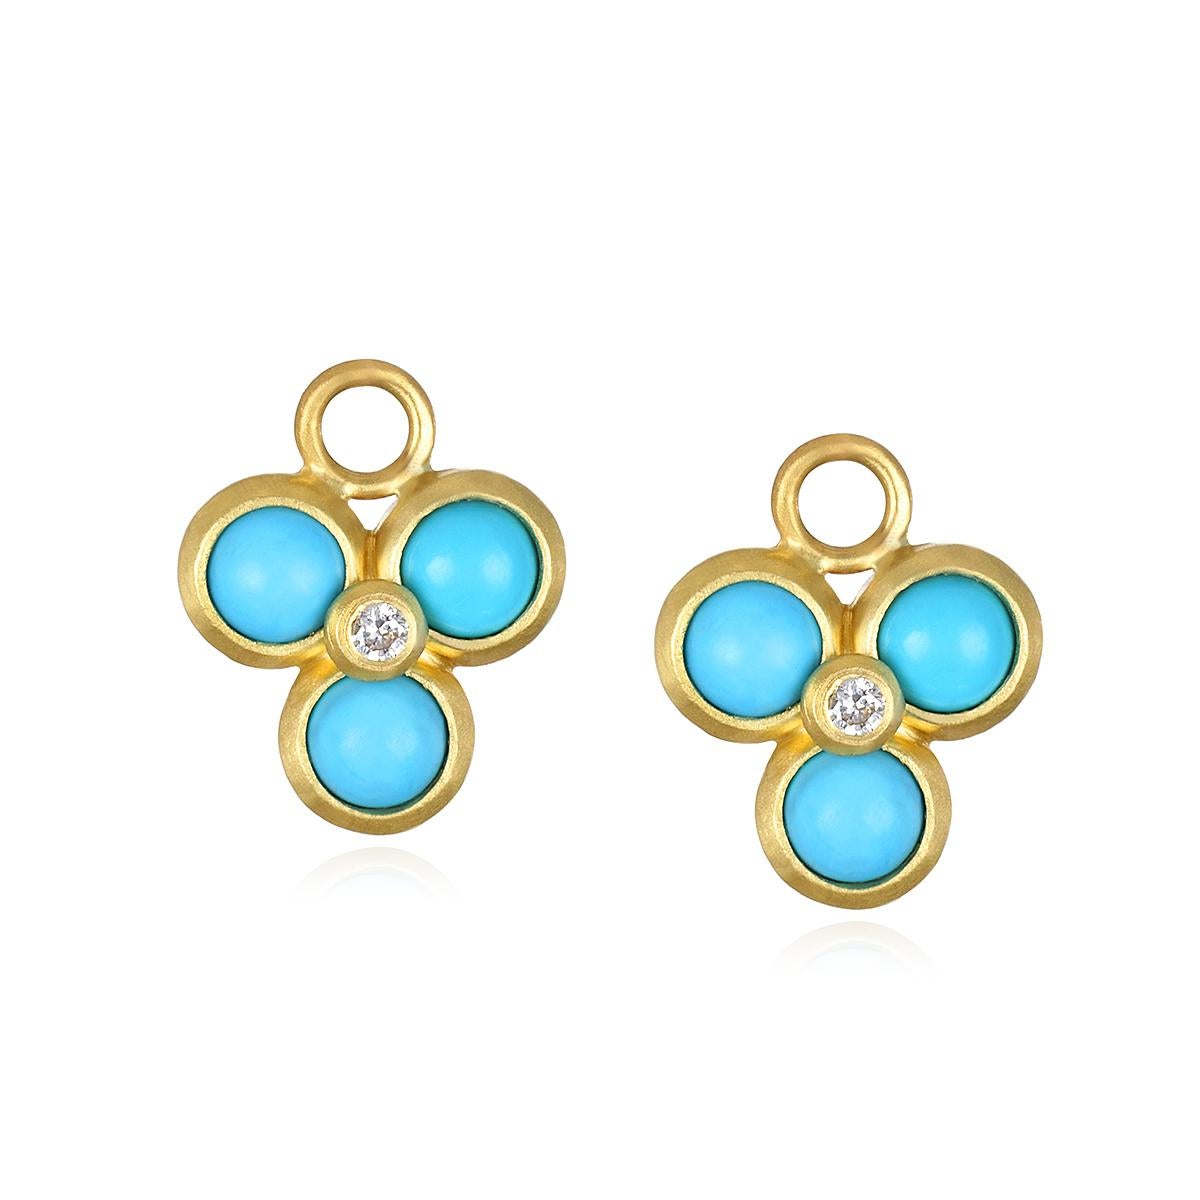 Faye Kim's 18 Karat Gold Triple Turquoise Diamond Drops feature three bezel set brightly hued turquoise stones and one round center diamond per drop. Providing the perfect amount of color 